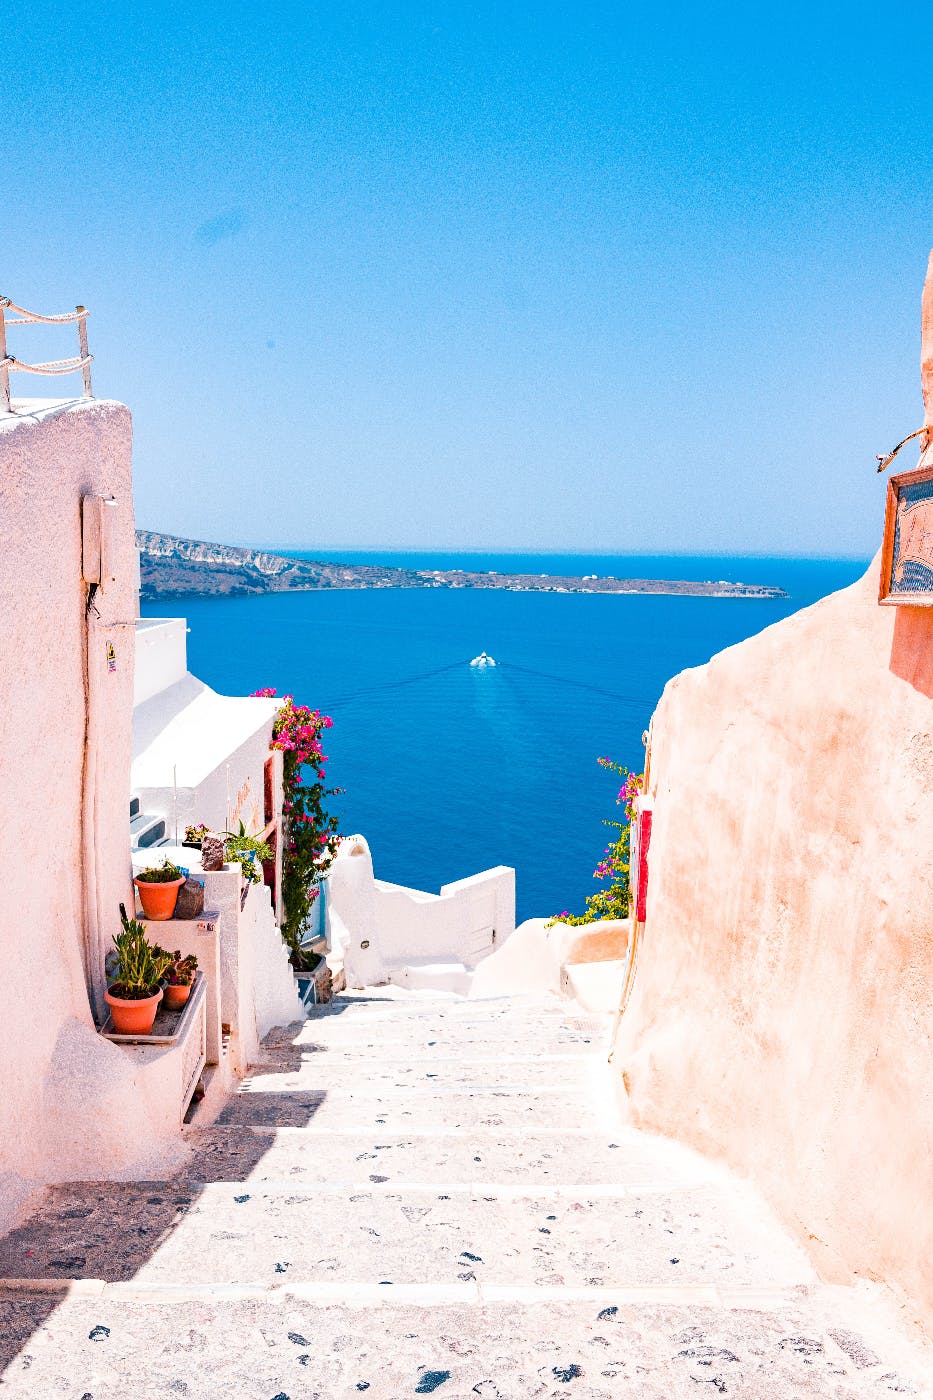 White stucco buildings overlooking an azure sea